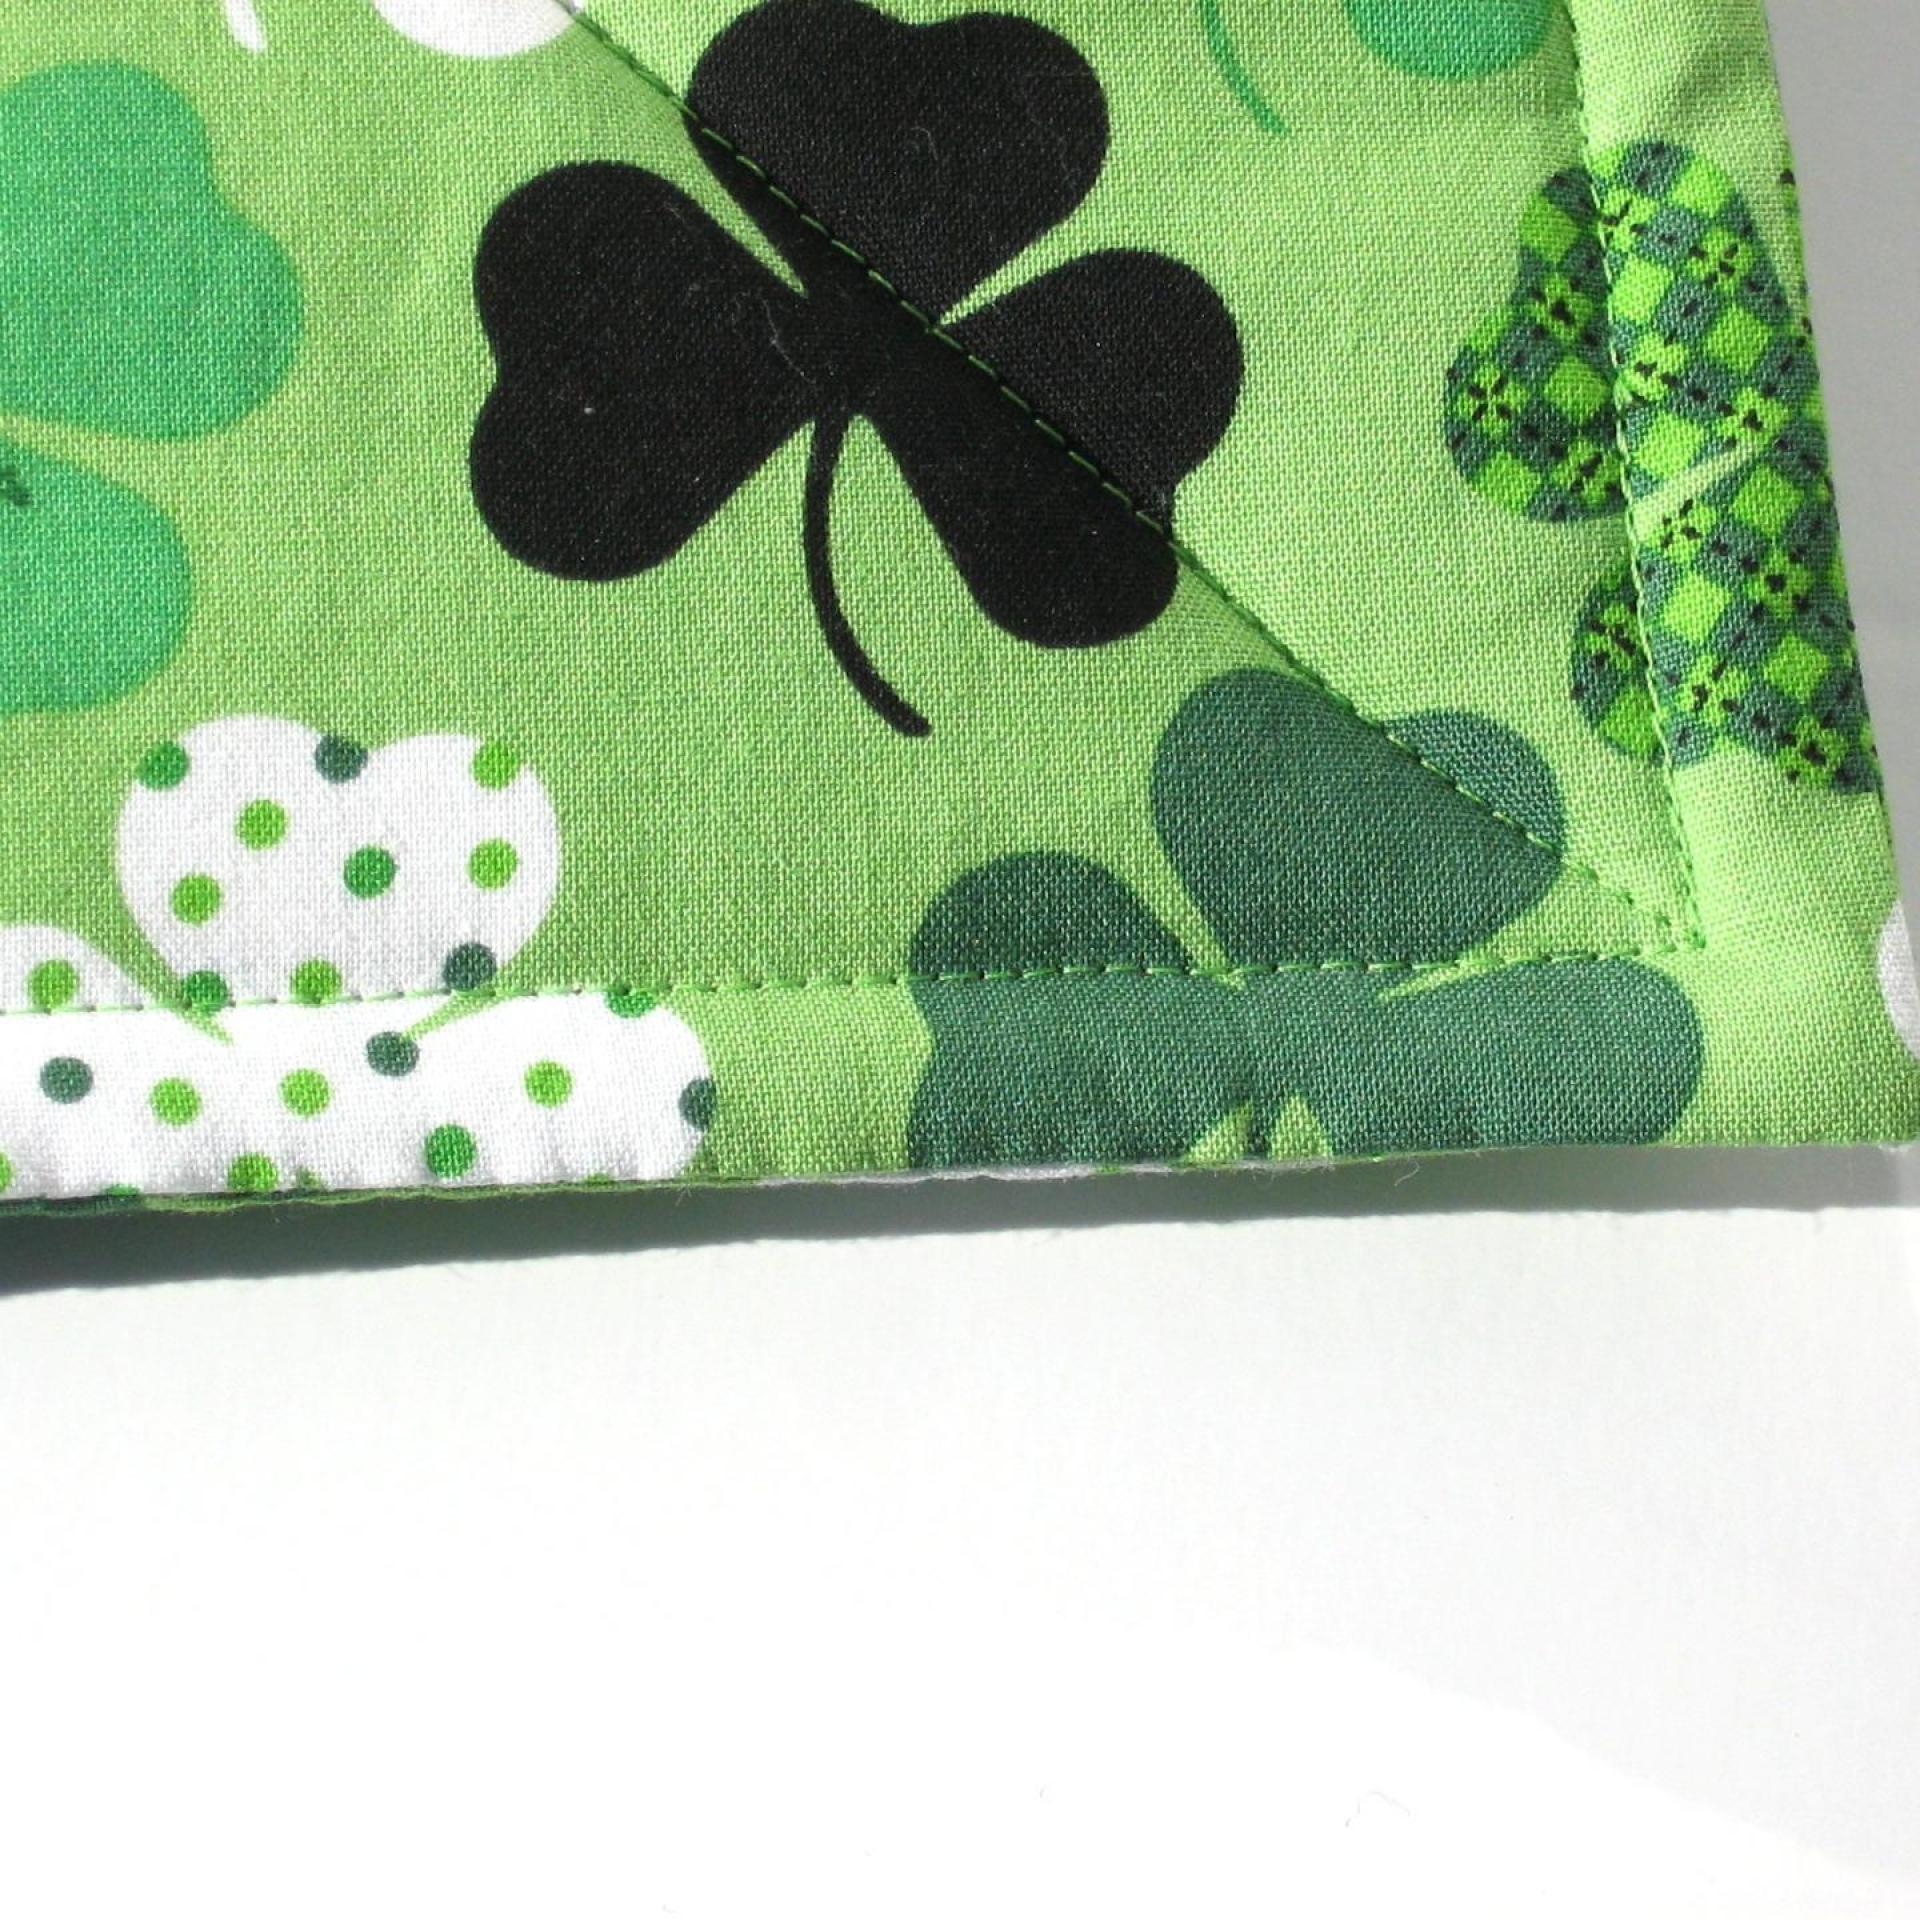 Shamrock Potholders with Dots and Stripes on a Green Background, St Patrick's Day Décor, USA Handmade Hot Pads, Housewarming Gift